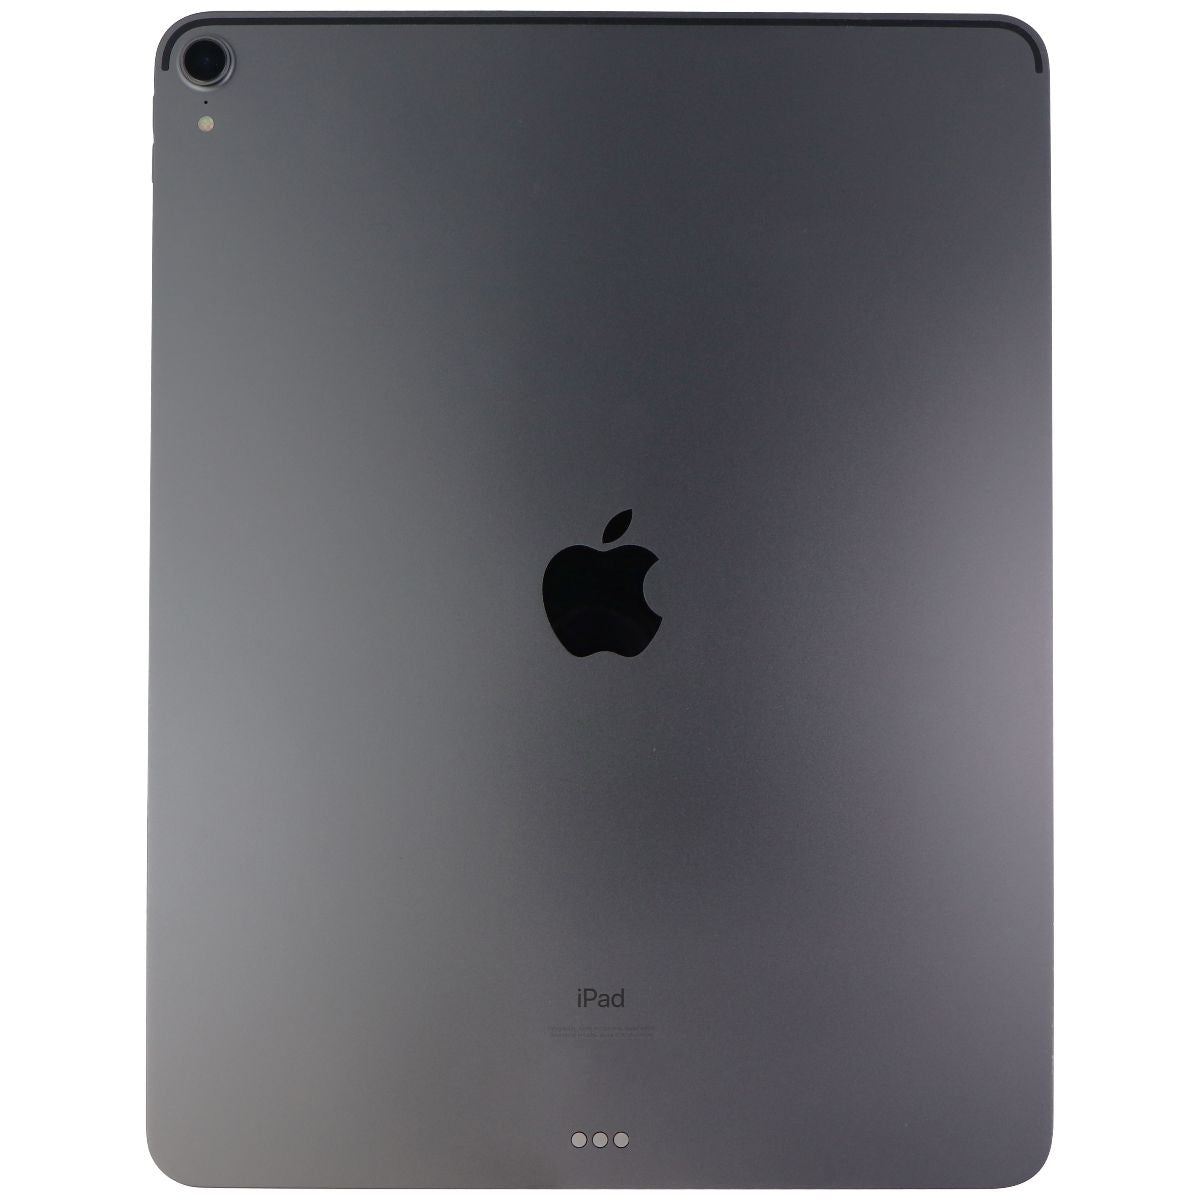 Apple iPad Pro 12.9-inch (3rd Gen) A1876 (Wi-Fi) - 64GB/Space Gray - BAD CAMERA iPads, Tablets & eBook Readers Apple    - Simple Cell Bulk Wholesale Pricing - USA Seller